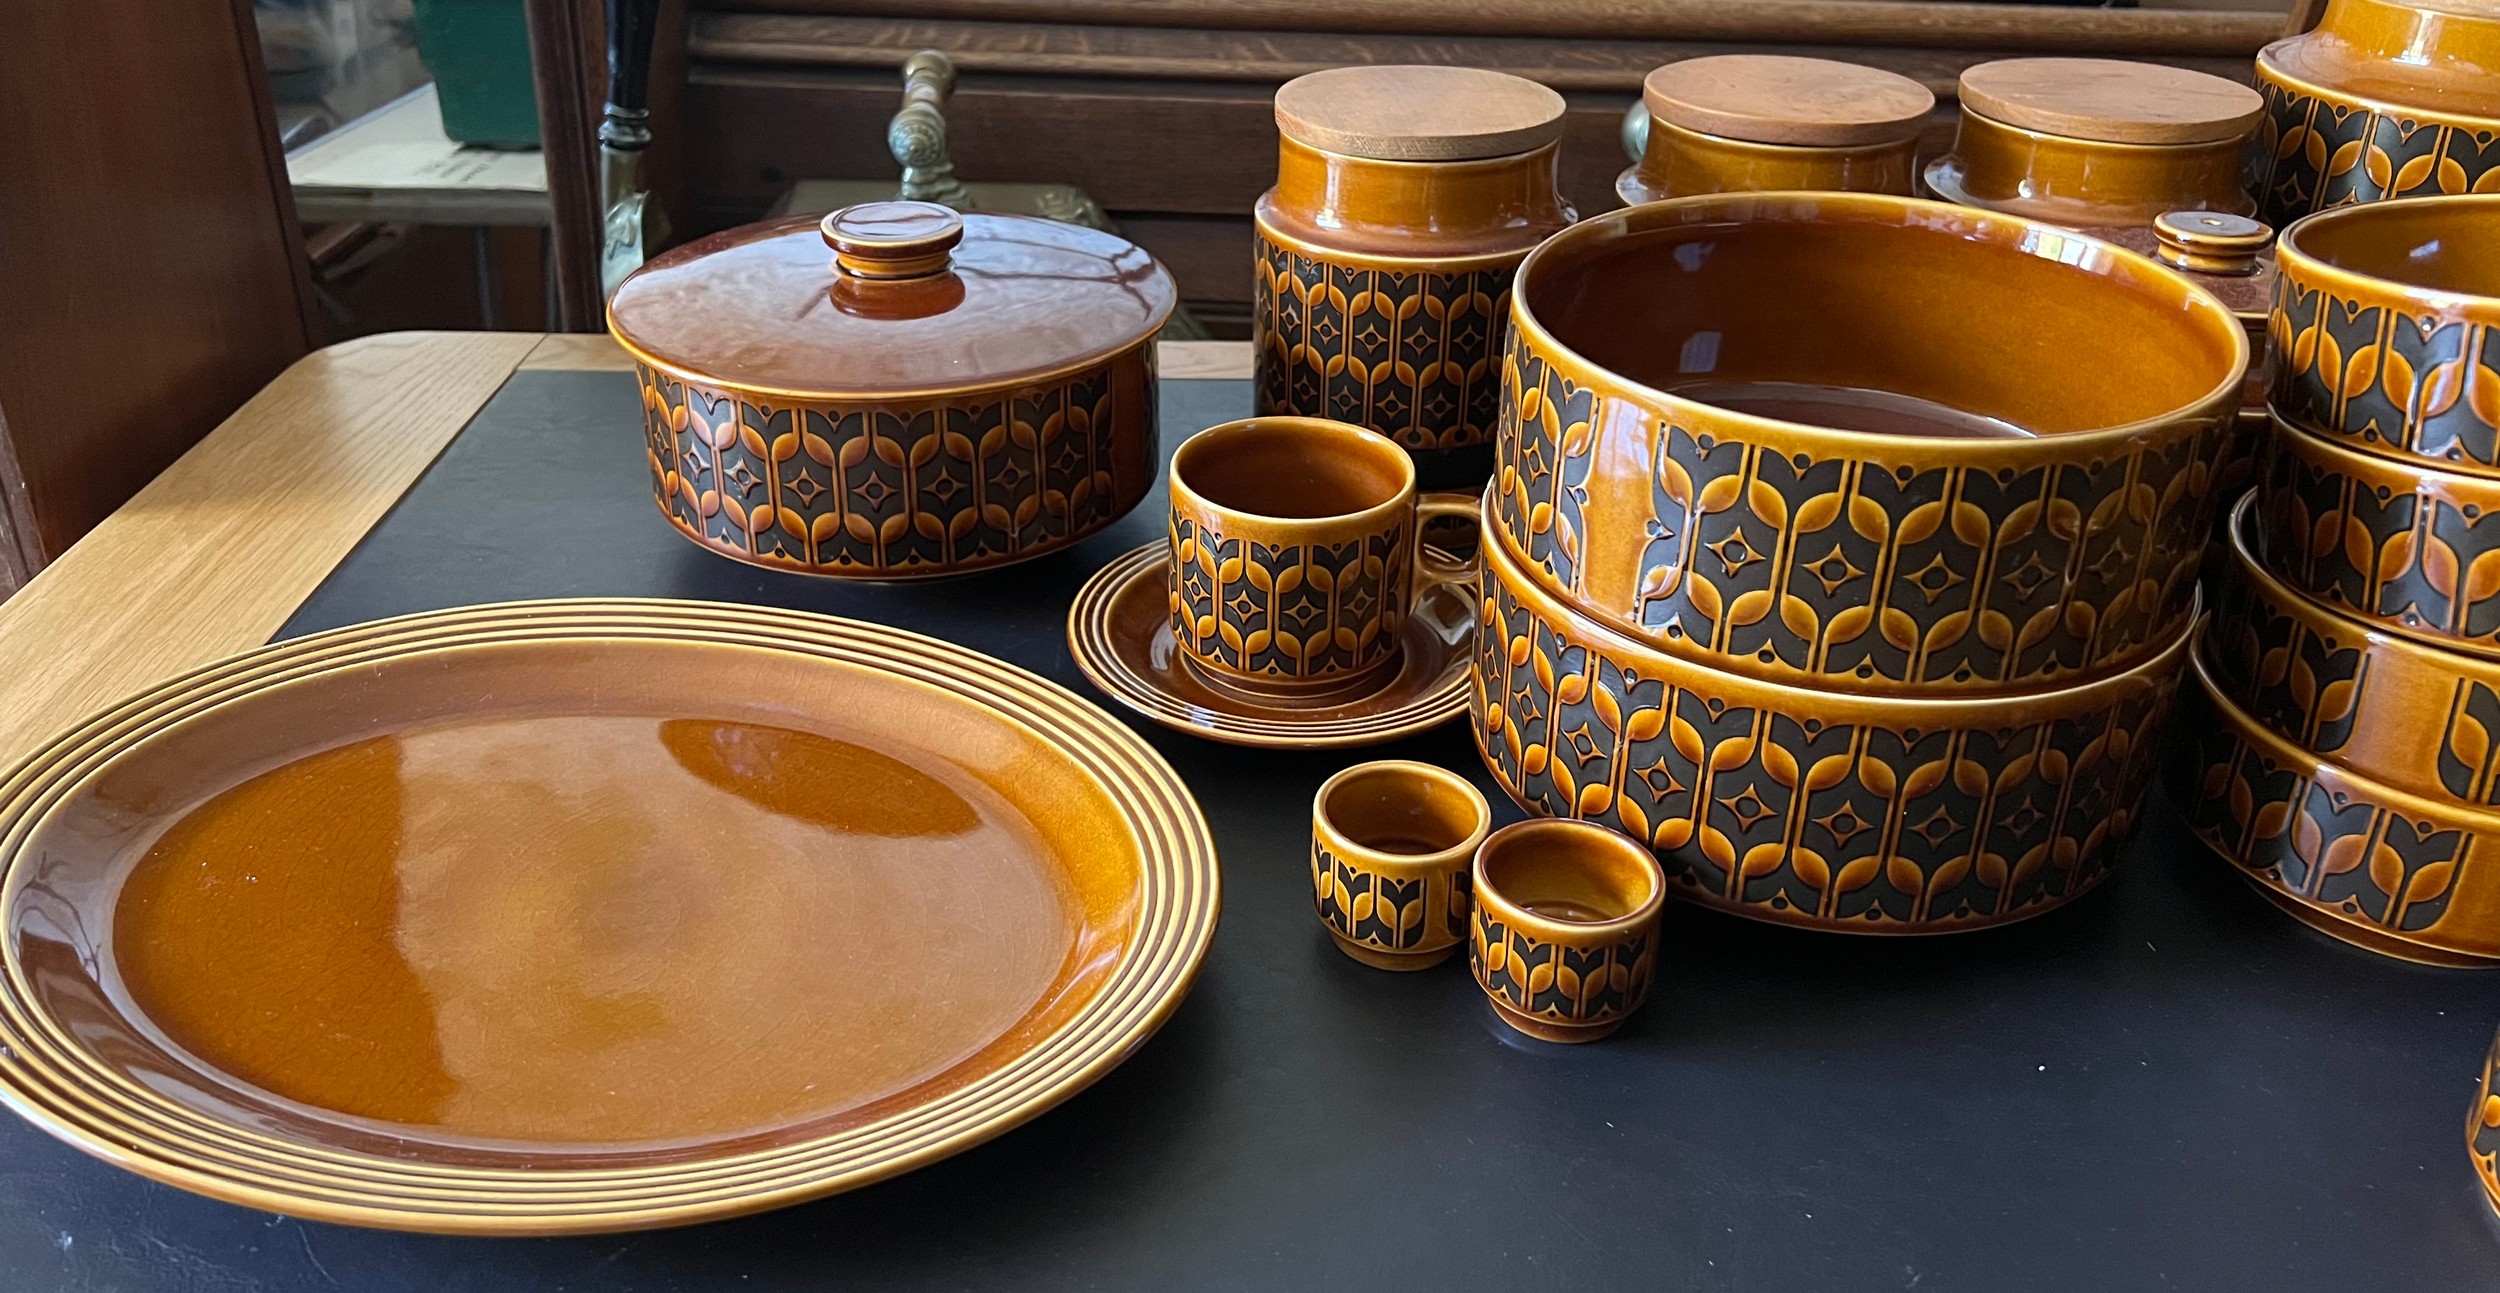 Hornsea Heirloom pattern part dinner service to include storage jars, plates etc. - Image 3 of 3